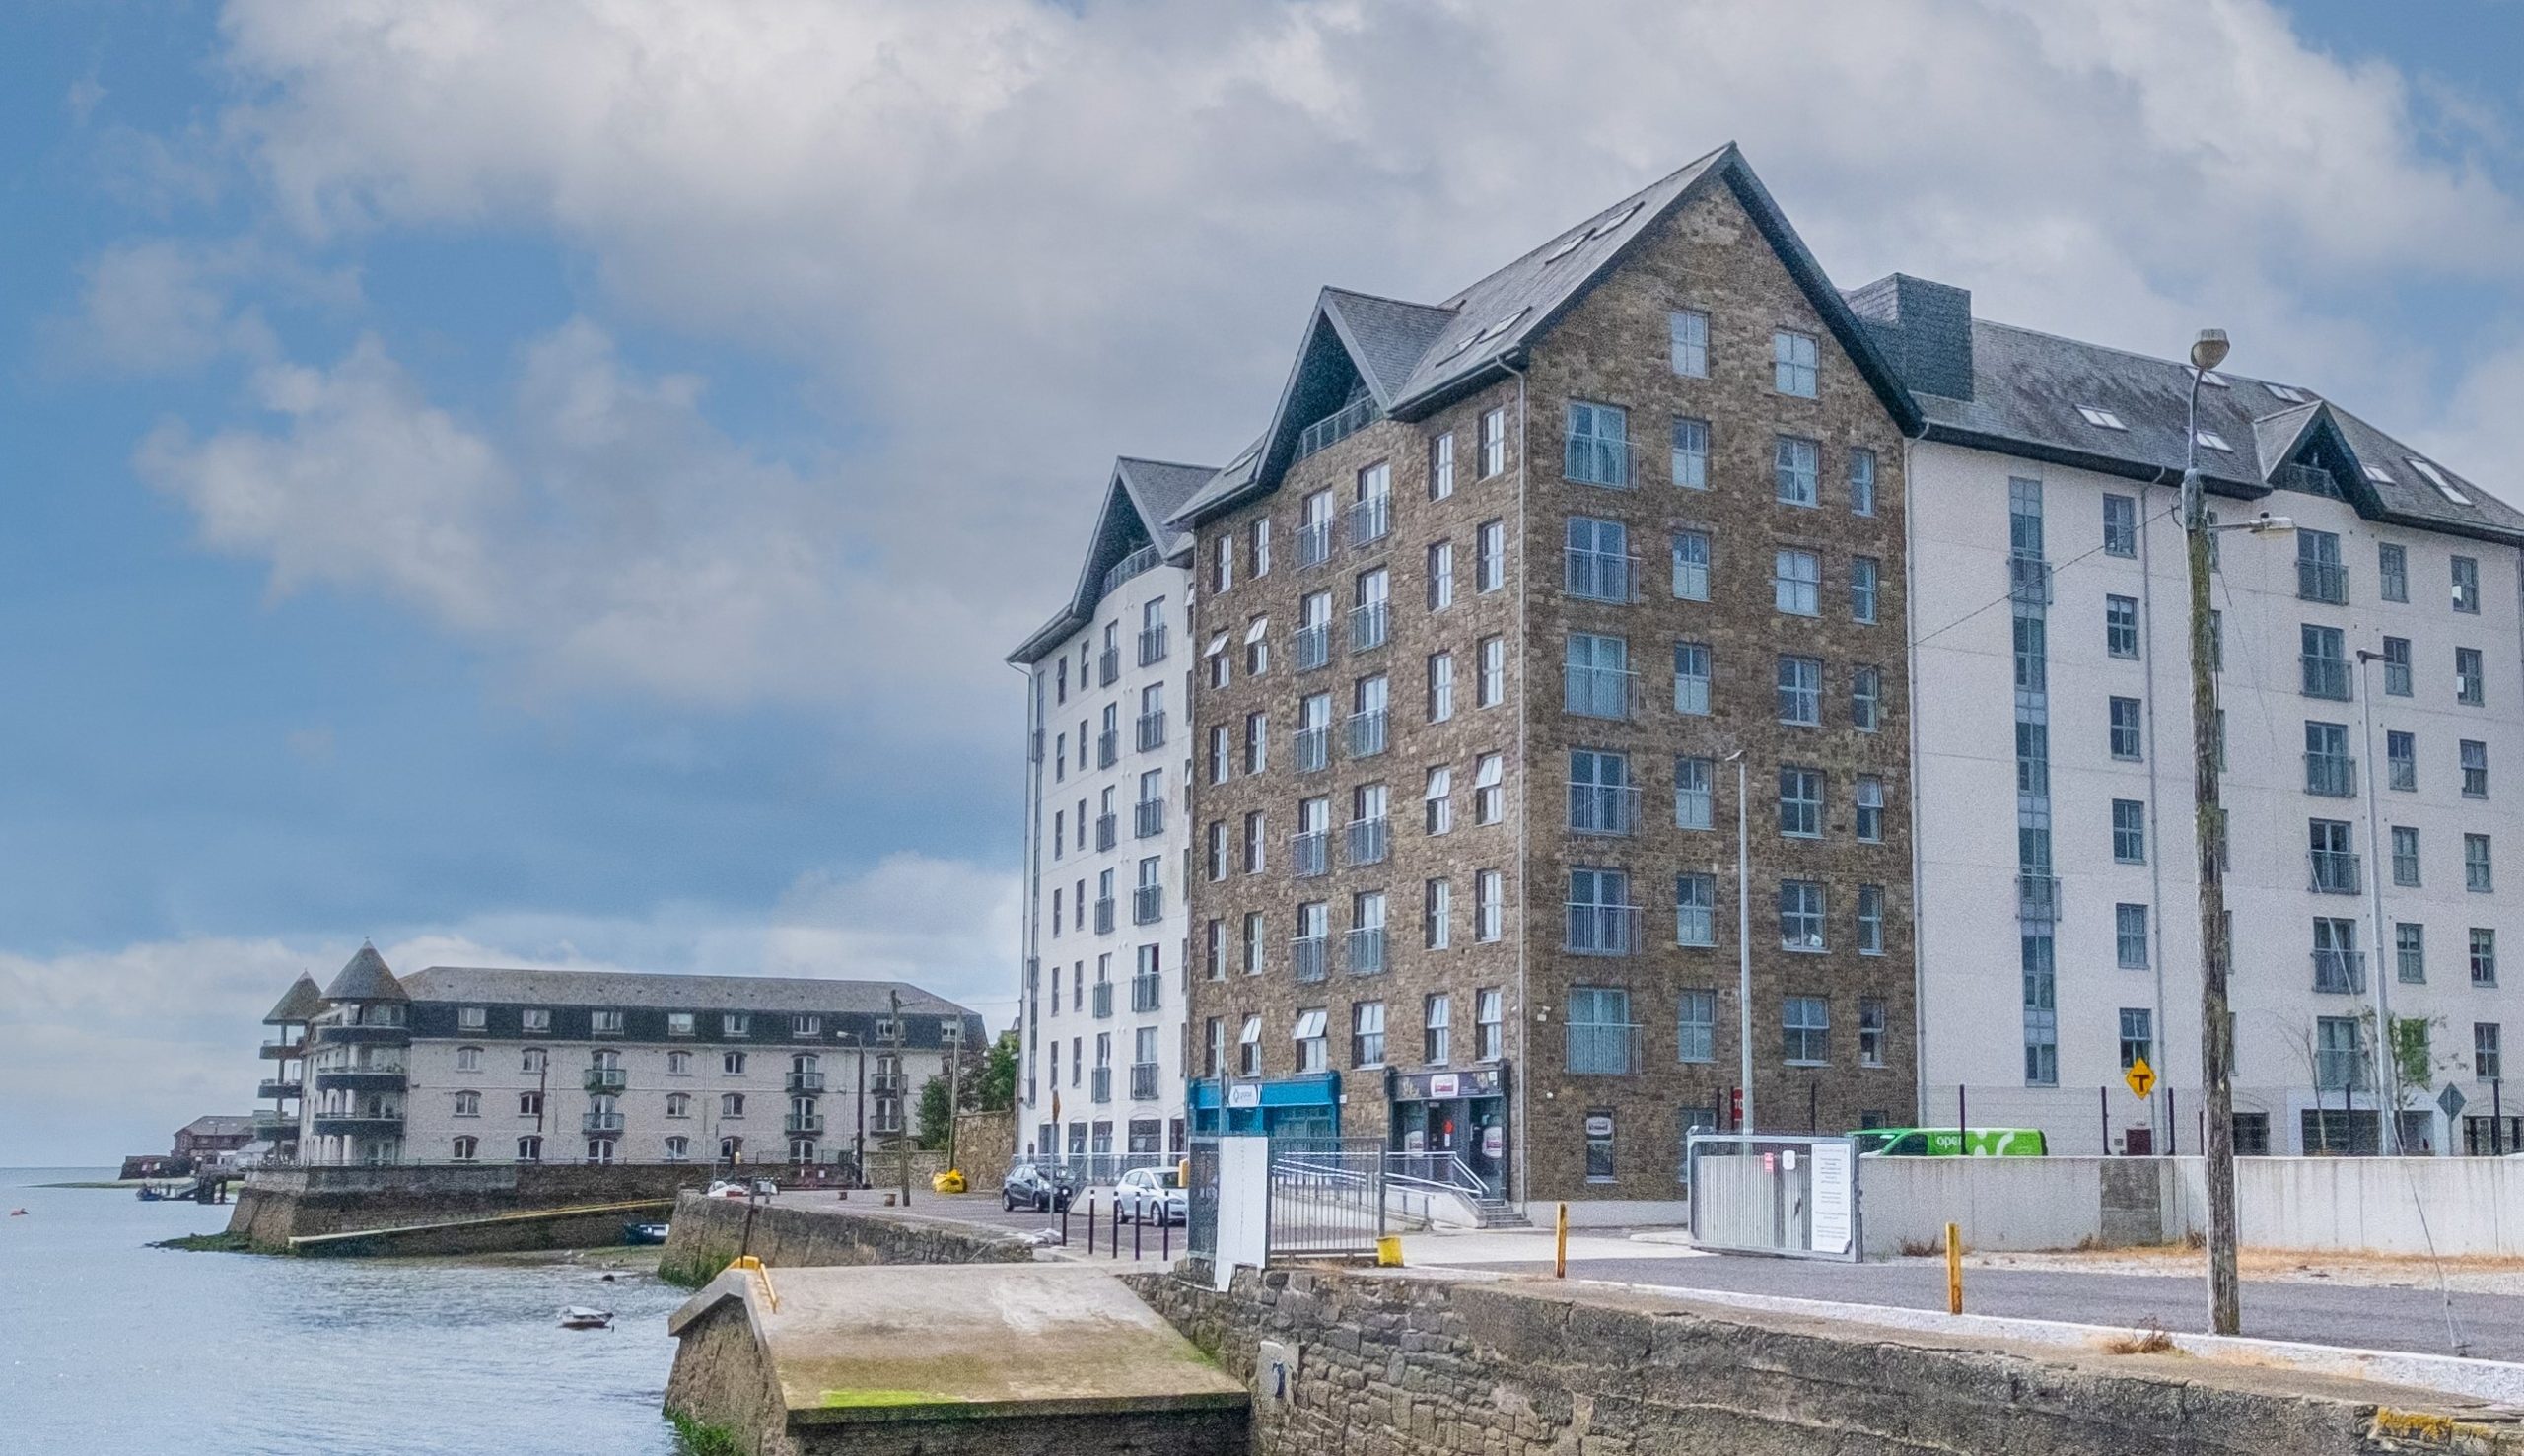 604 Pier Head, Youghal